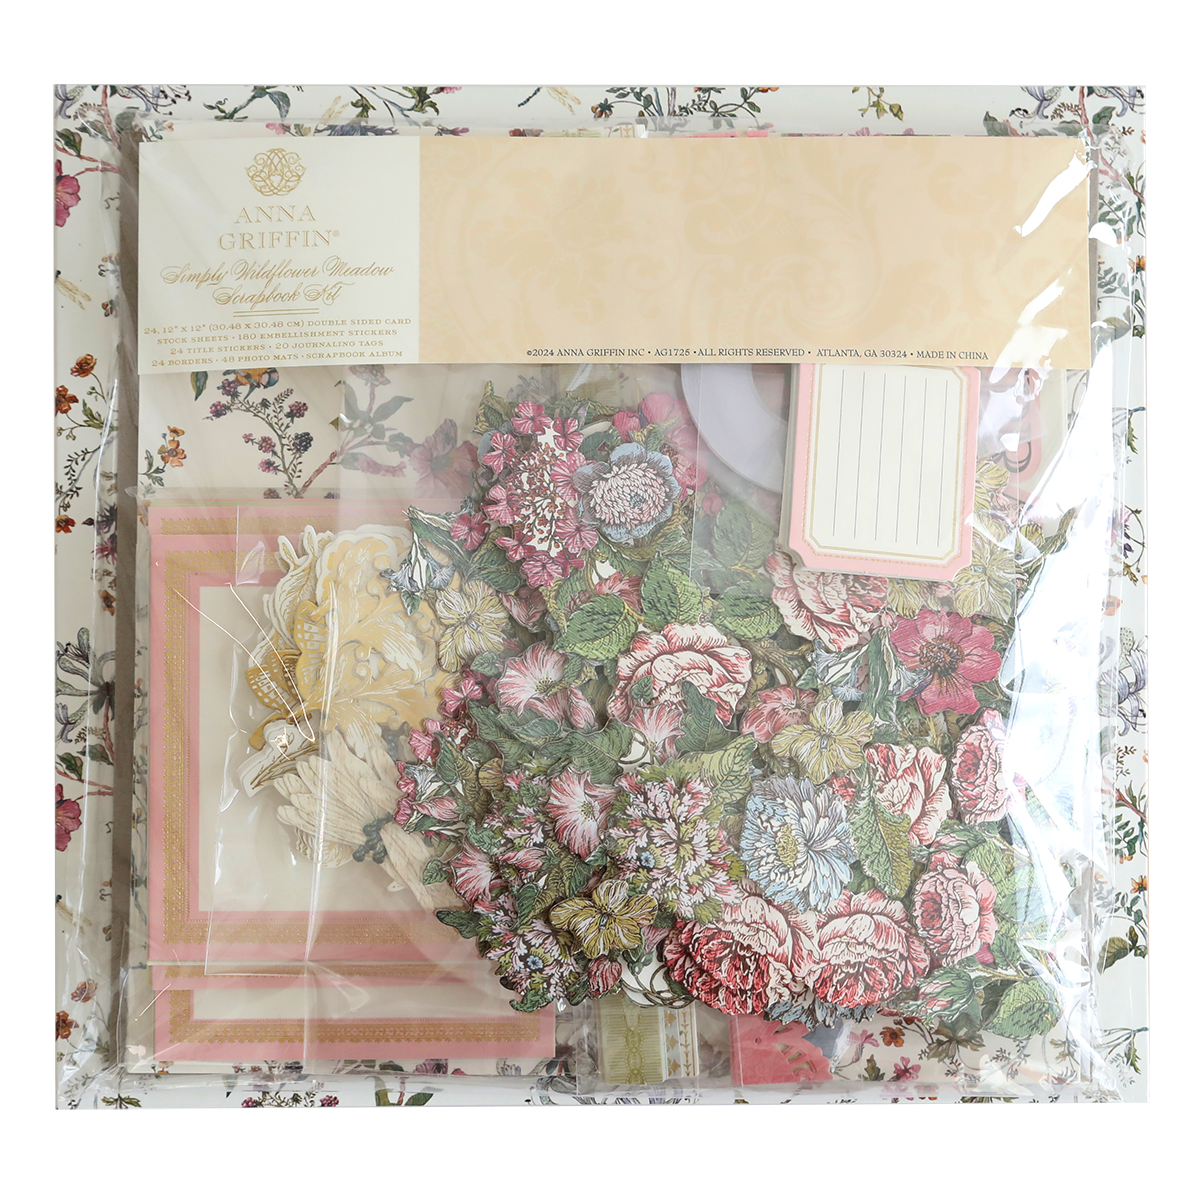 A pack of Simply Wildflower Meadow Scrapbook Kit, including patterned papers and embellishments, displayed in transparent packaging.